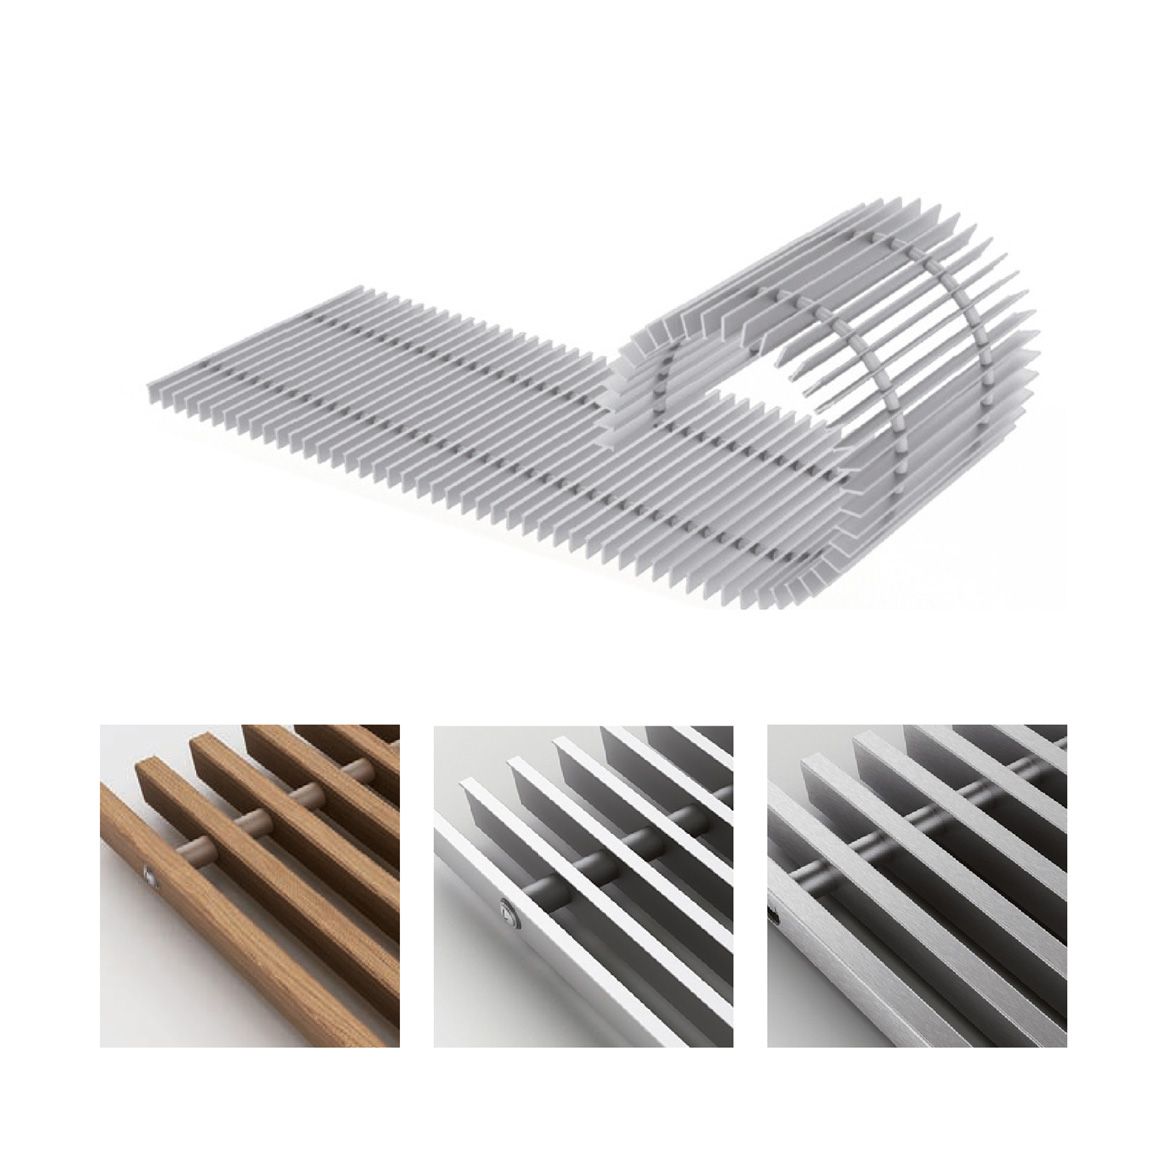 A range of grille options in wood, aluminium or stainless steel.